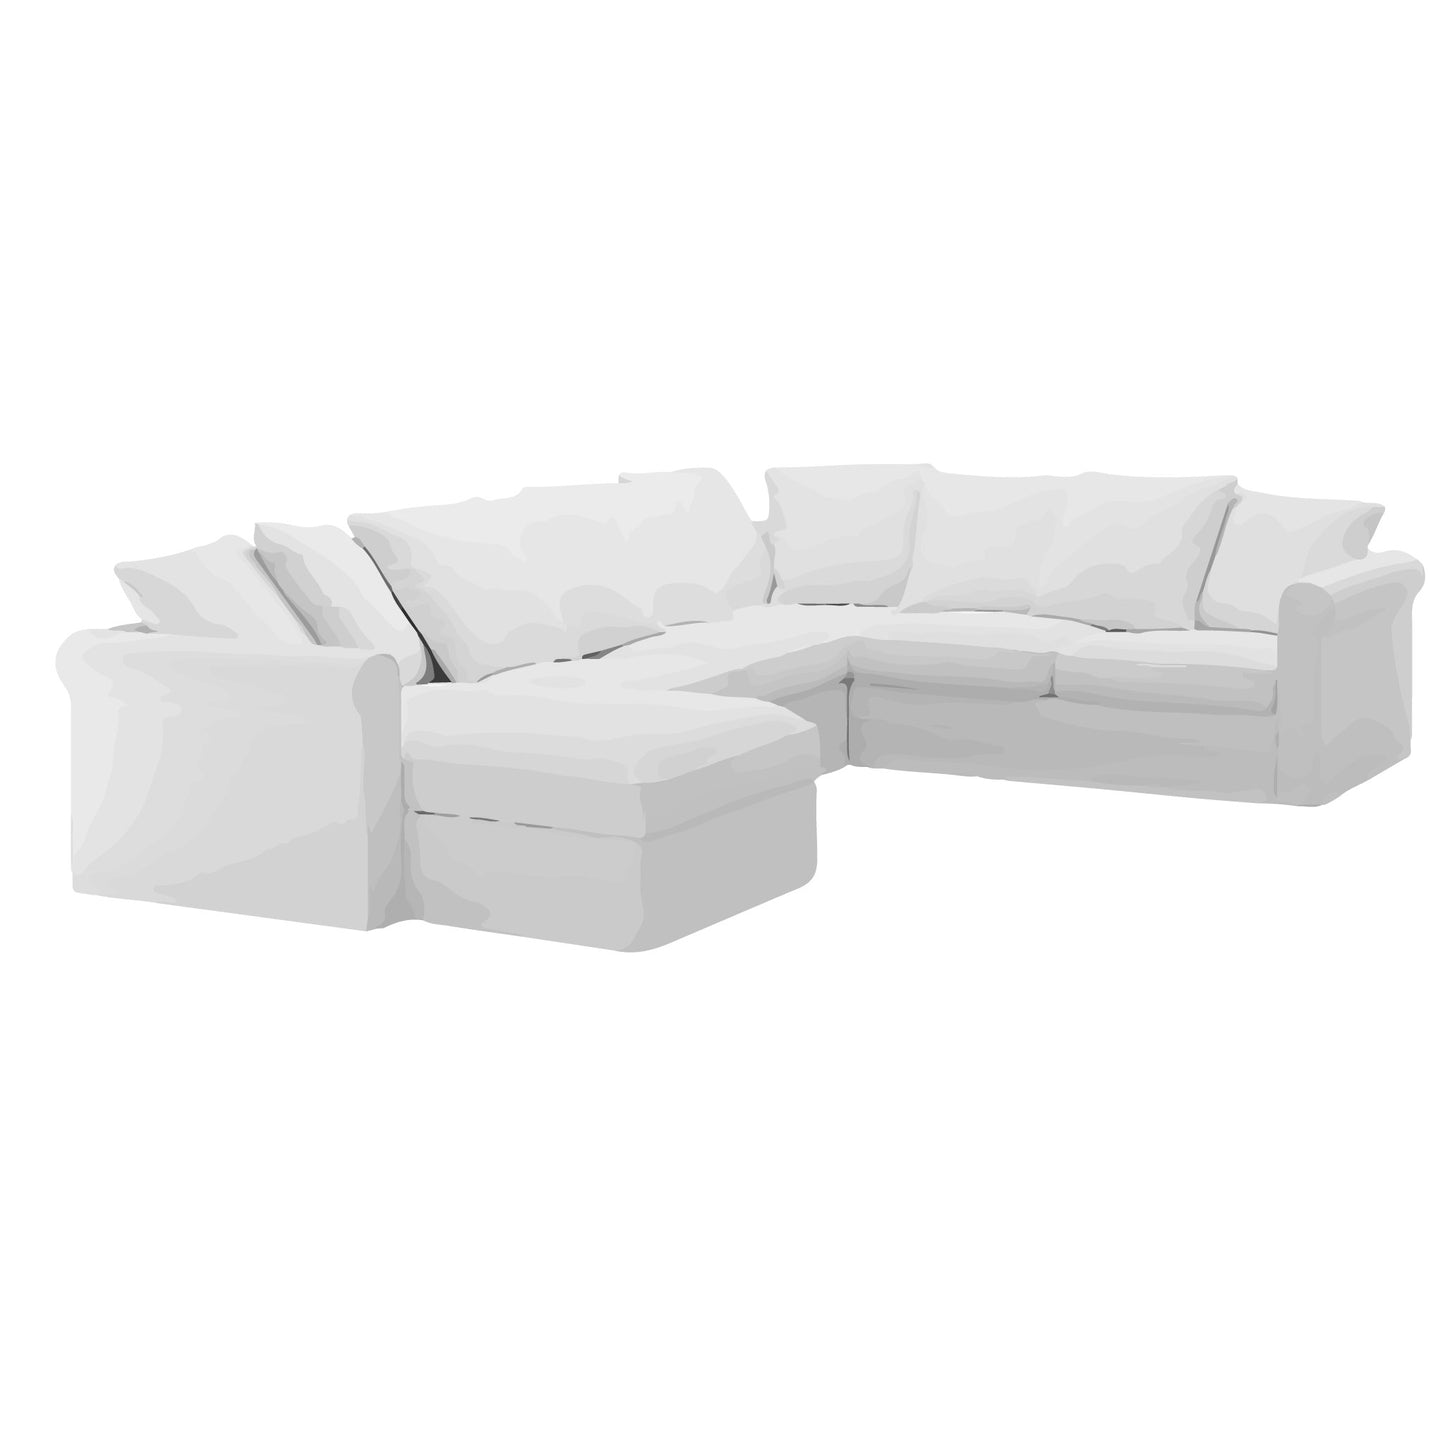 Gronlid 5 Seater Corner Sofa with Chaise Cover